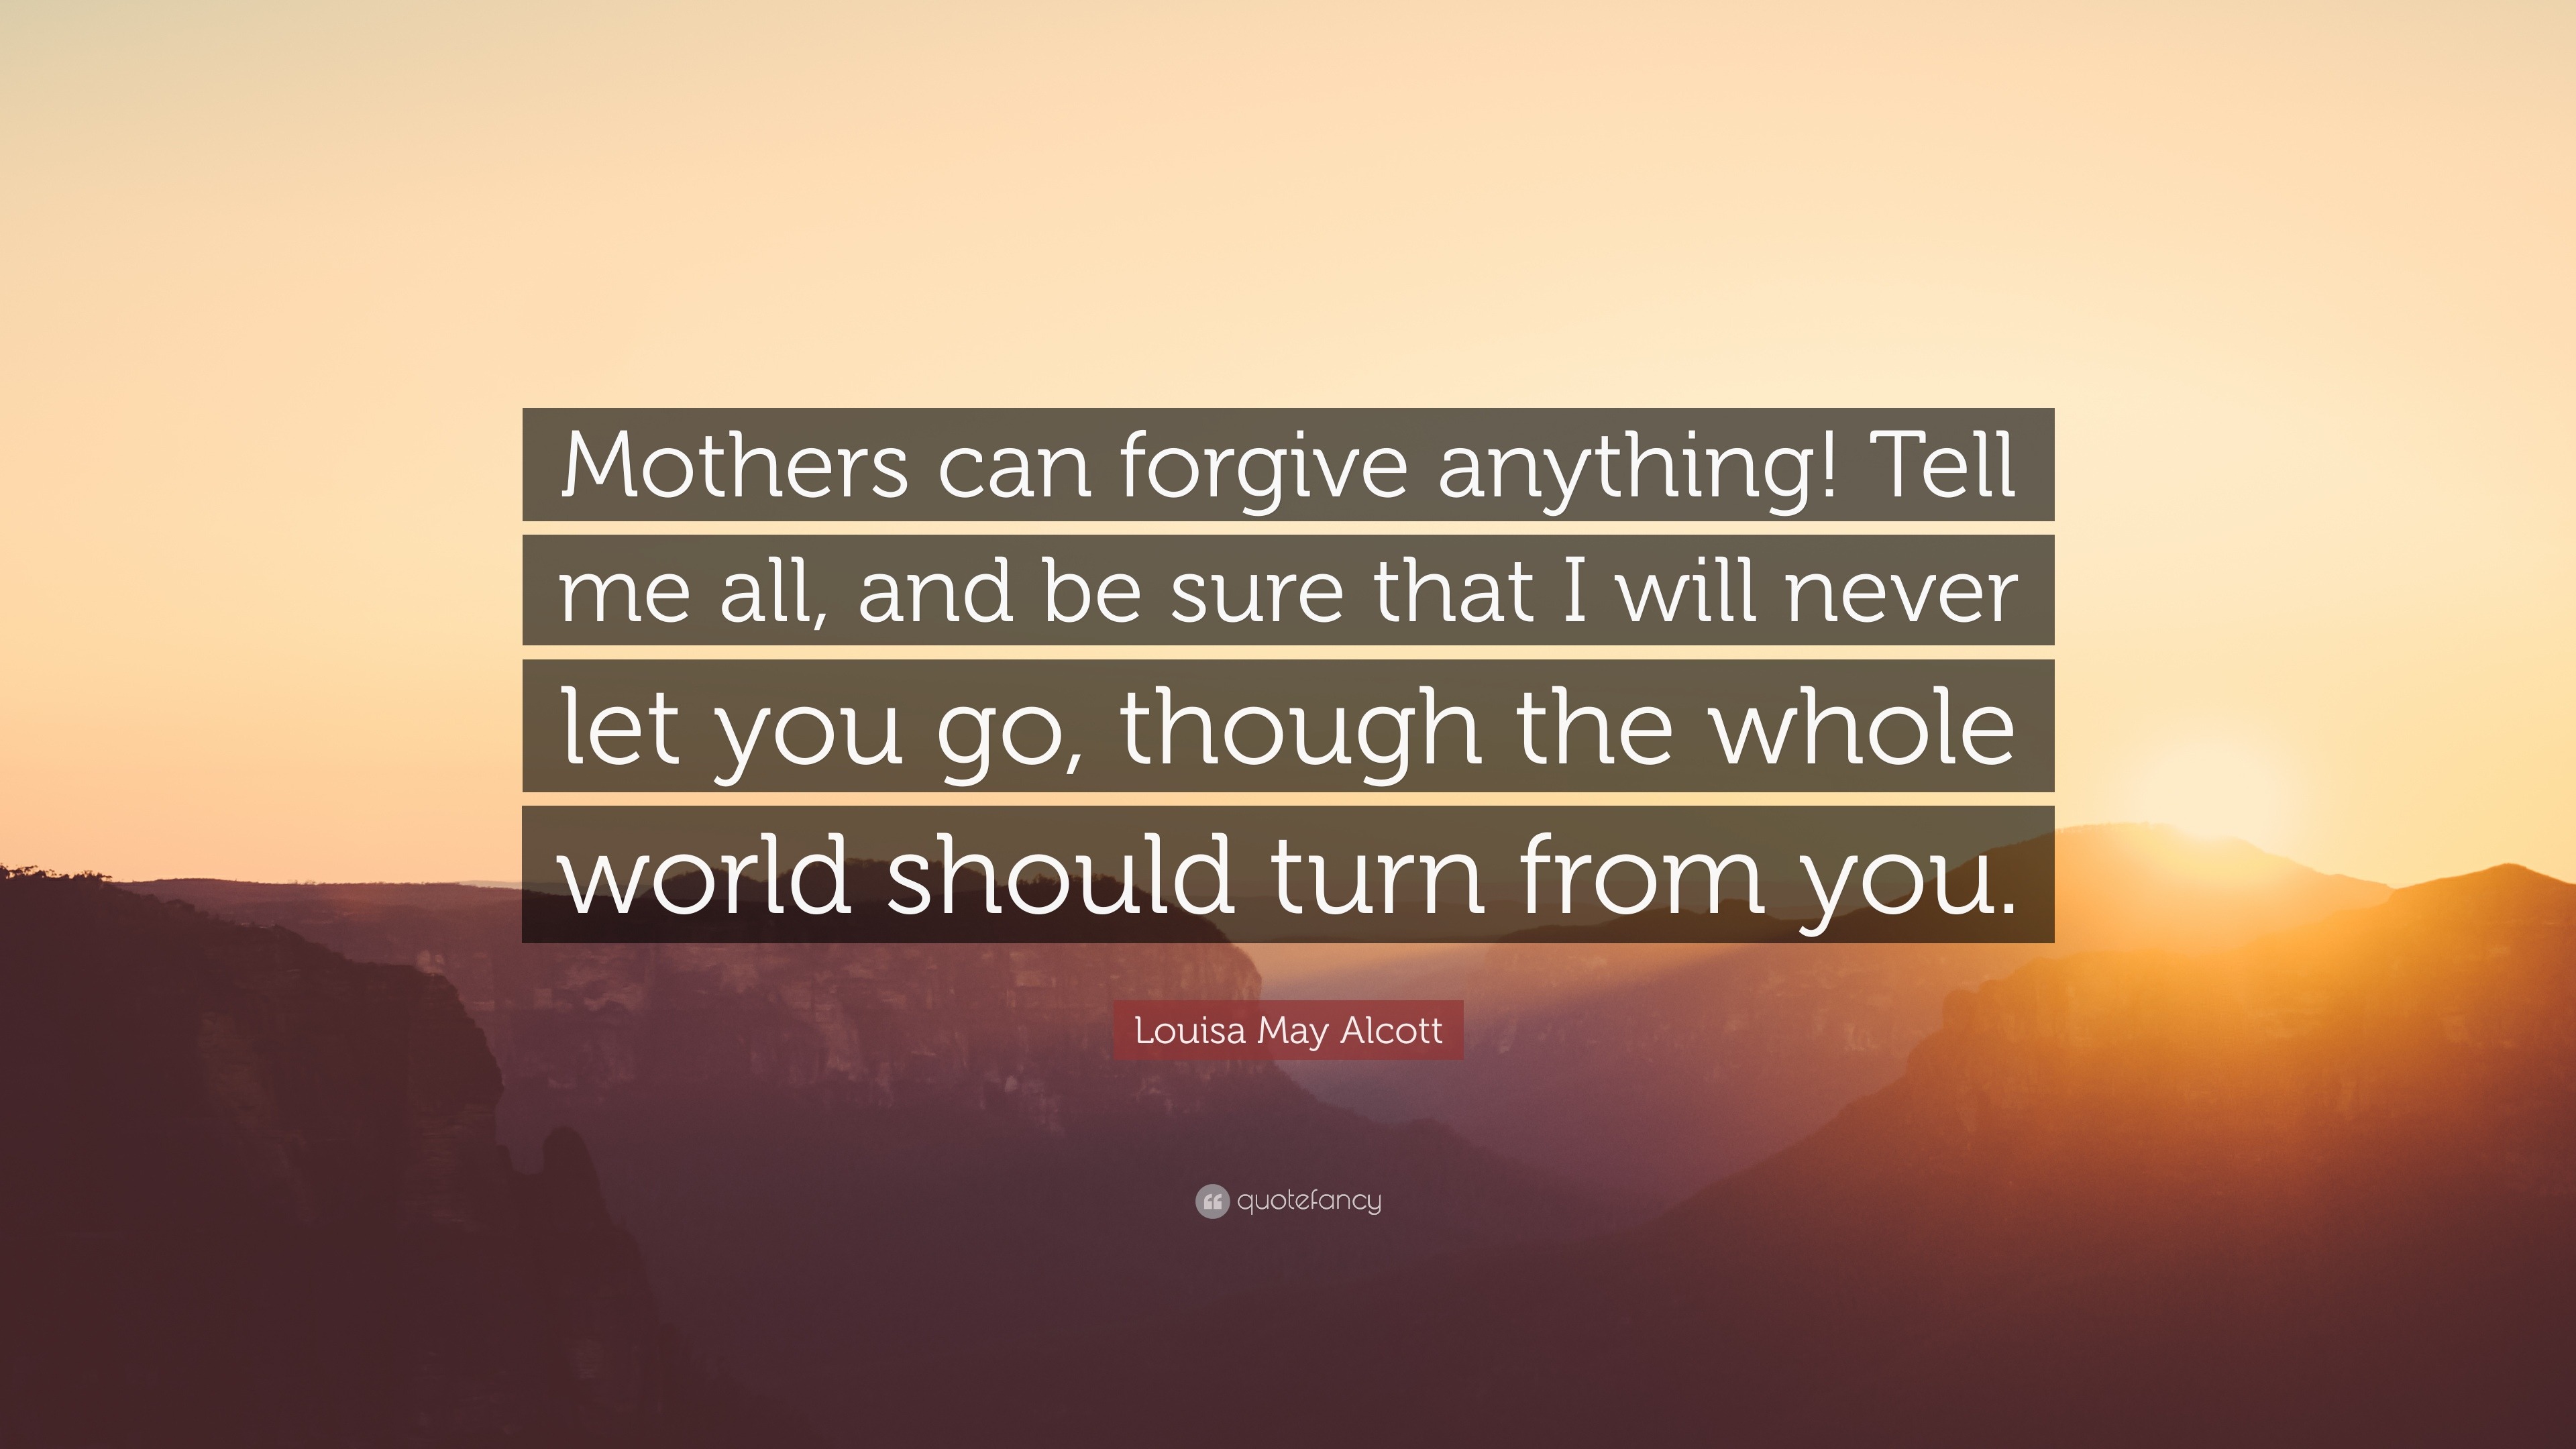 Louisa May Alcott Quote: “Mothers can forgive anything! Tell me all ...